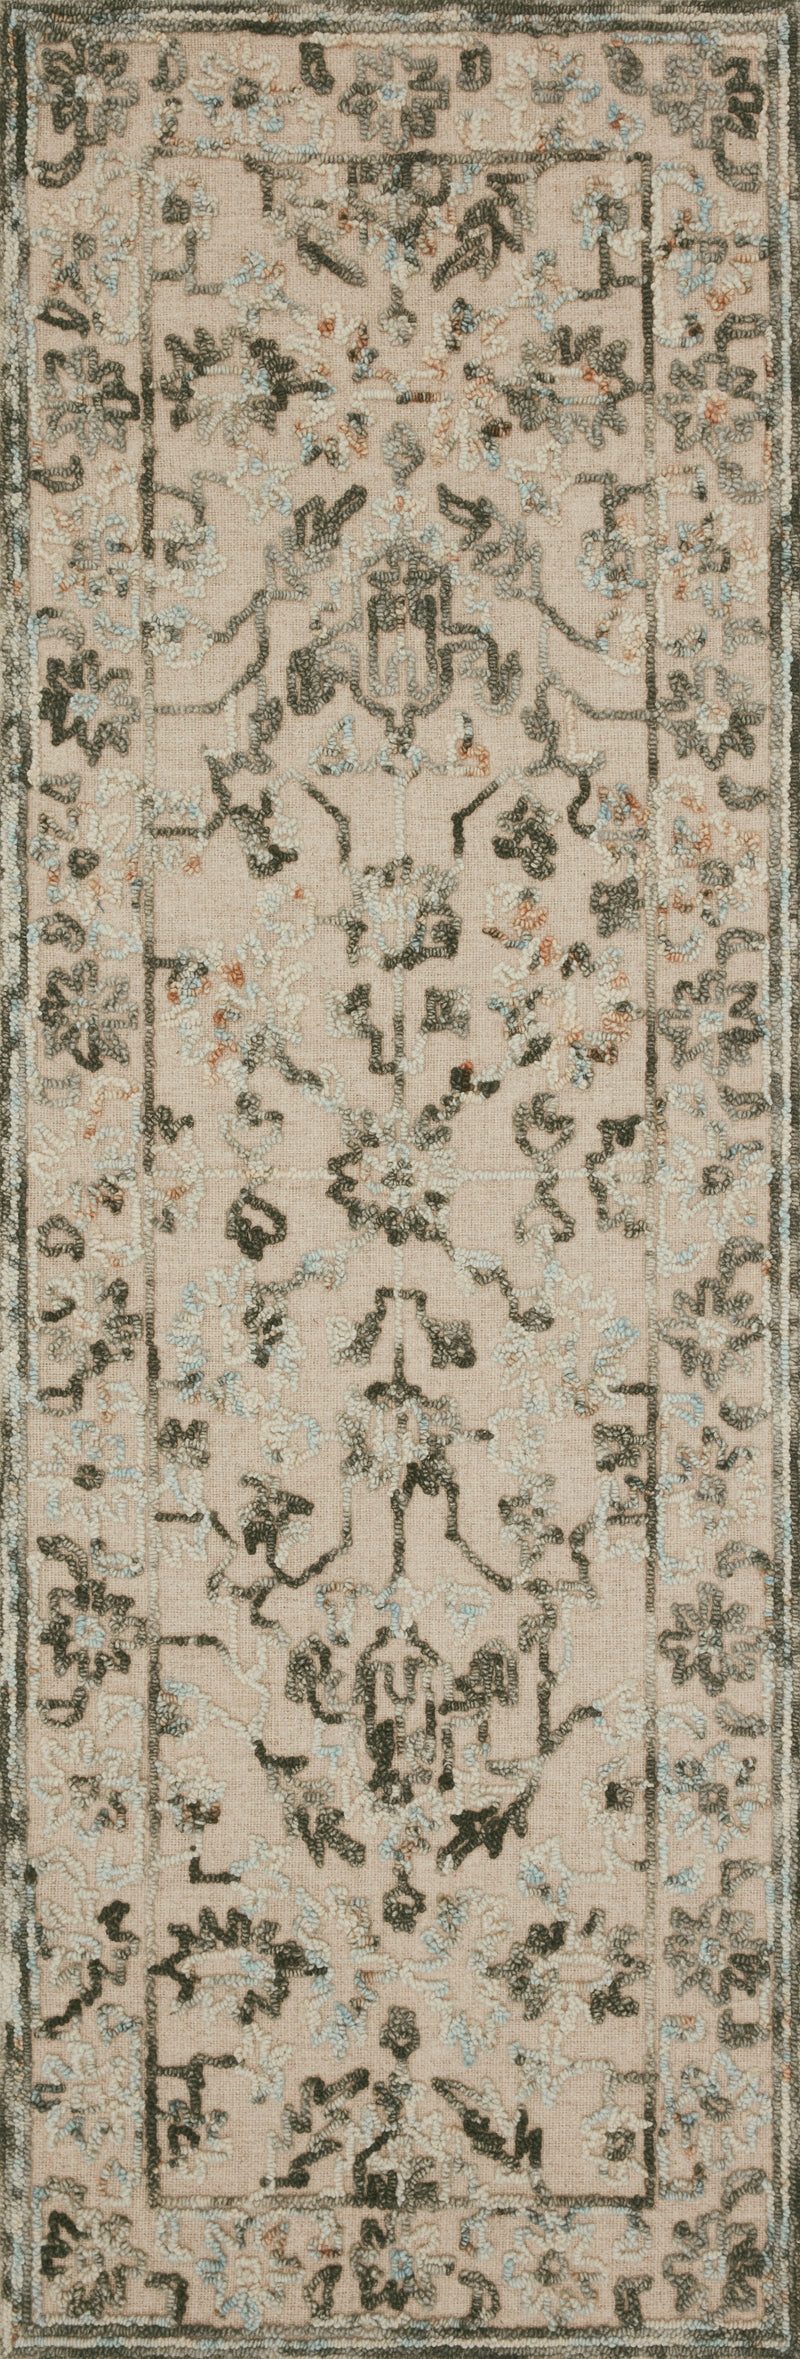 Halle Collection Wool Rug  in  Grey / Sky Gray Accent Hand-Hooked Wool